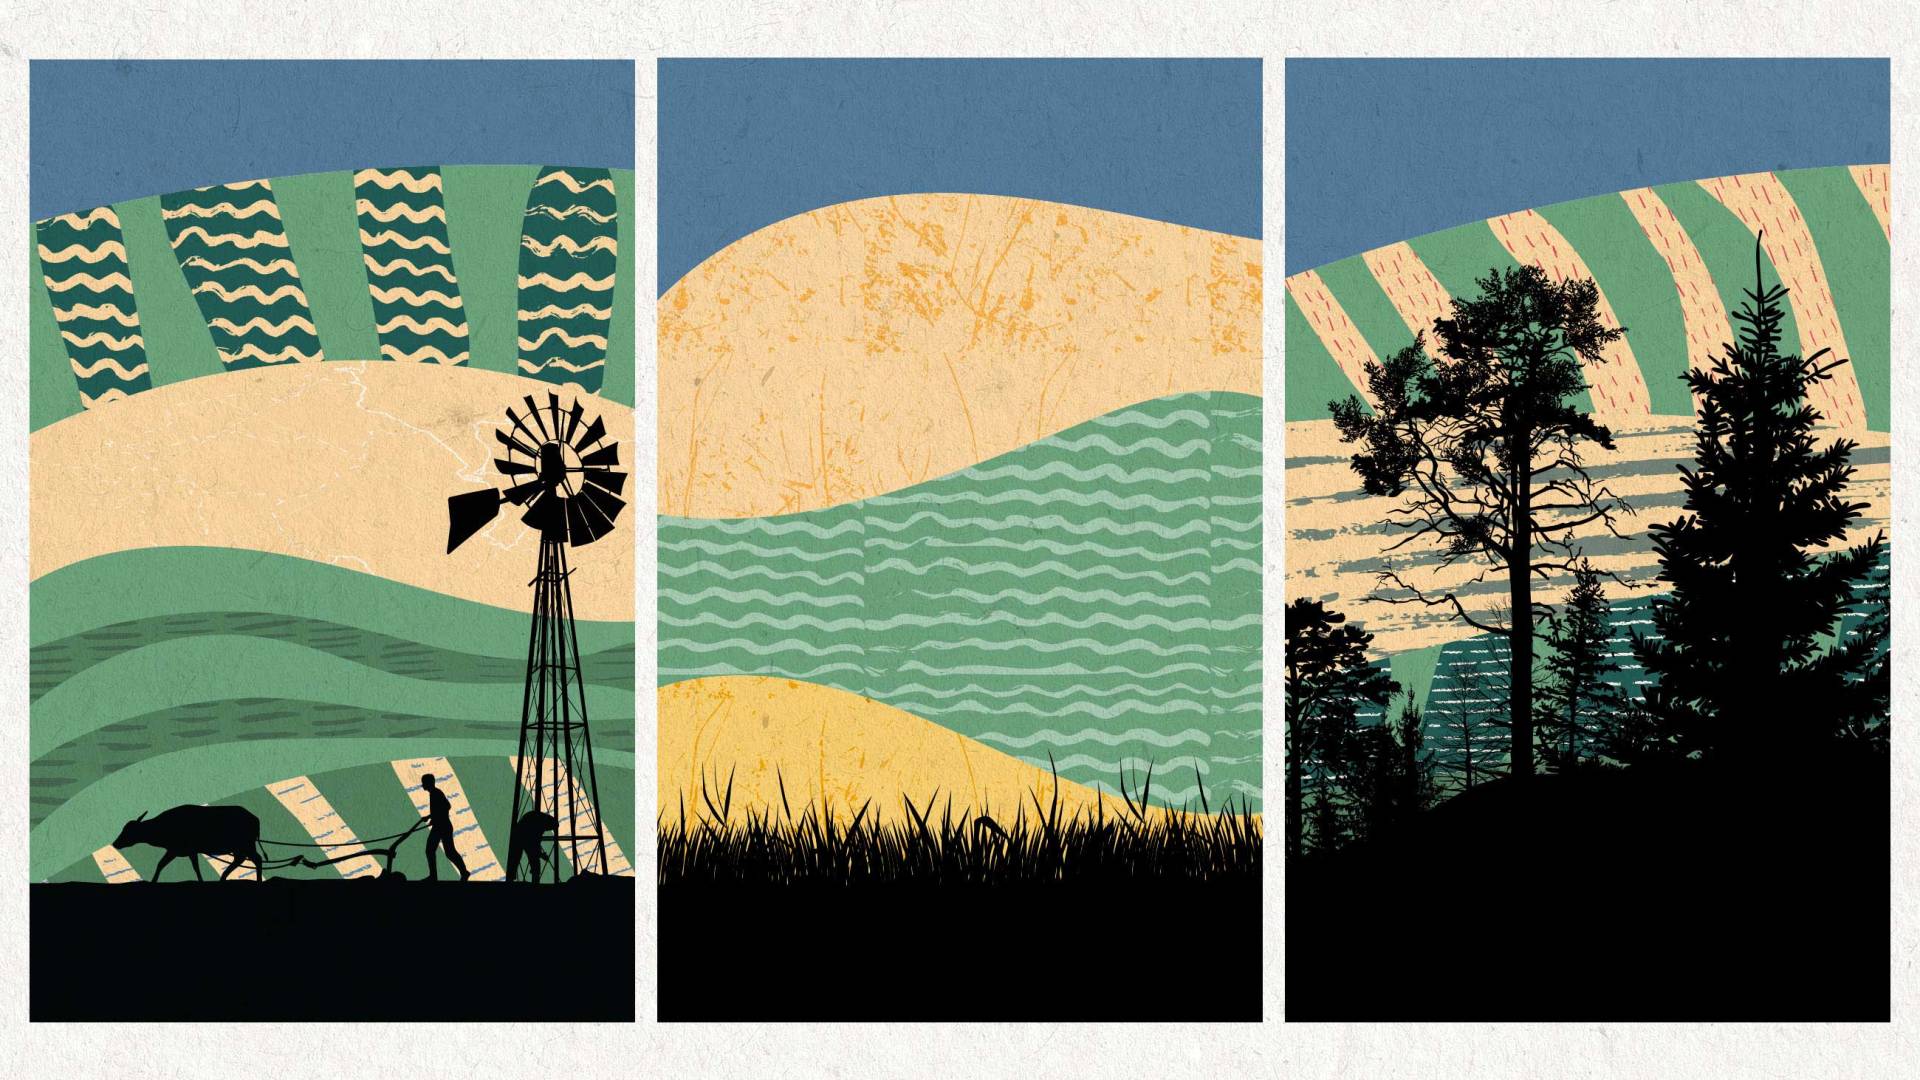 silhouettes of a farmer plowing, a windmill, farrow fields and forest